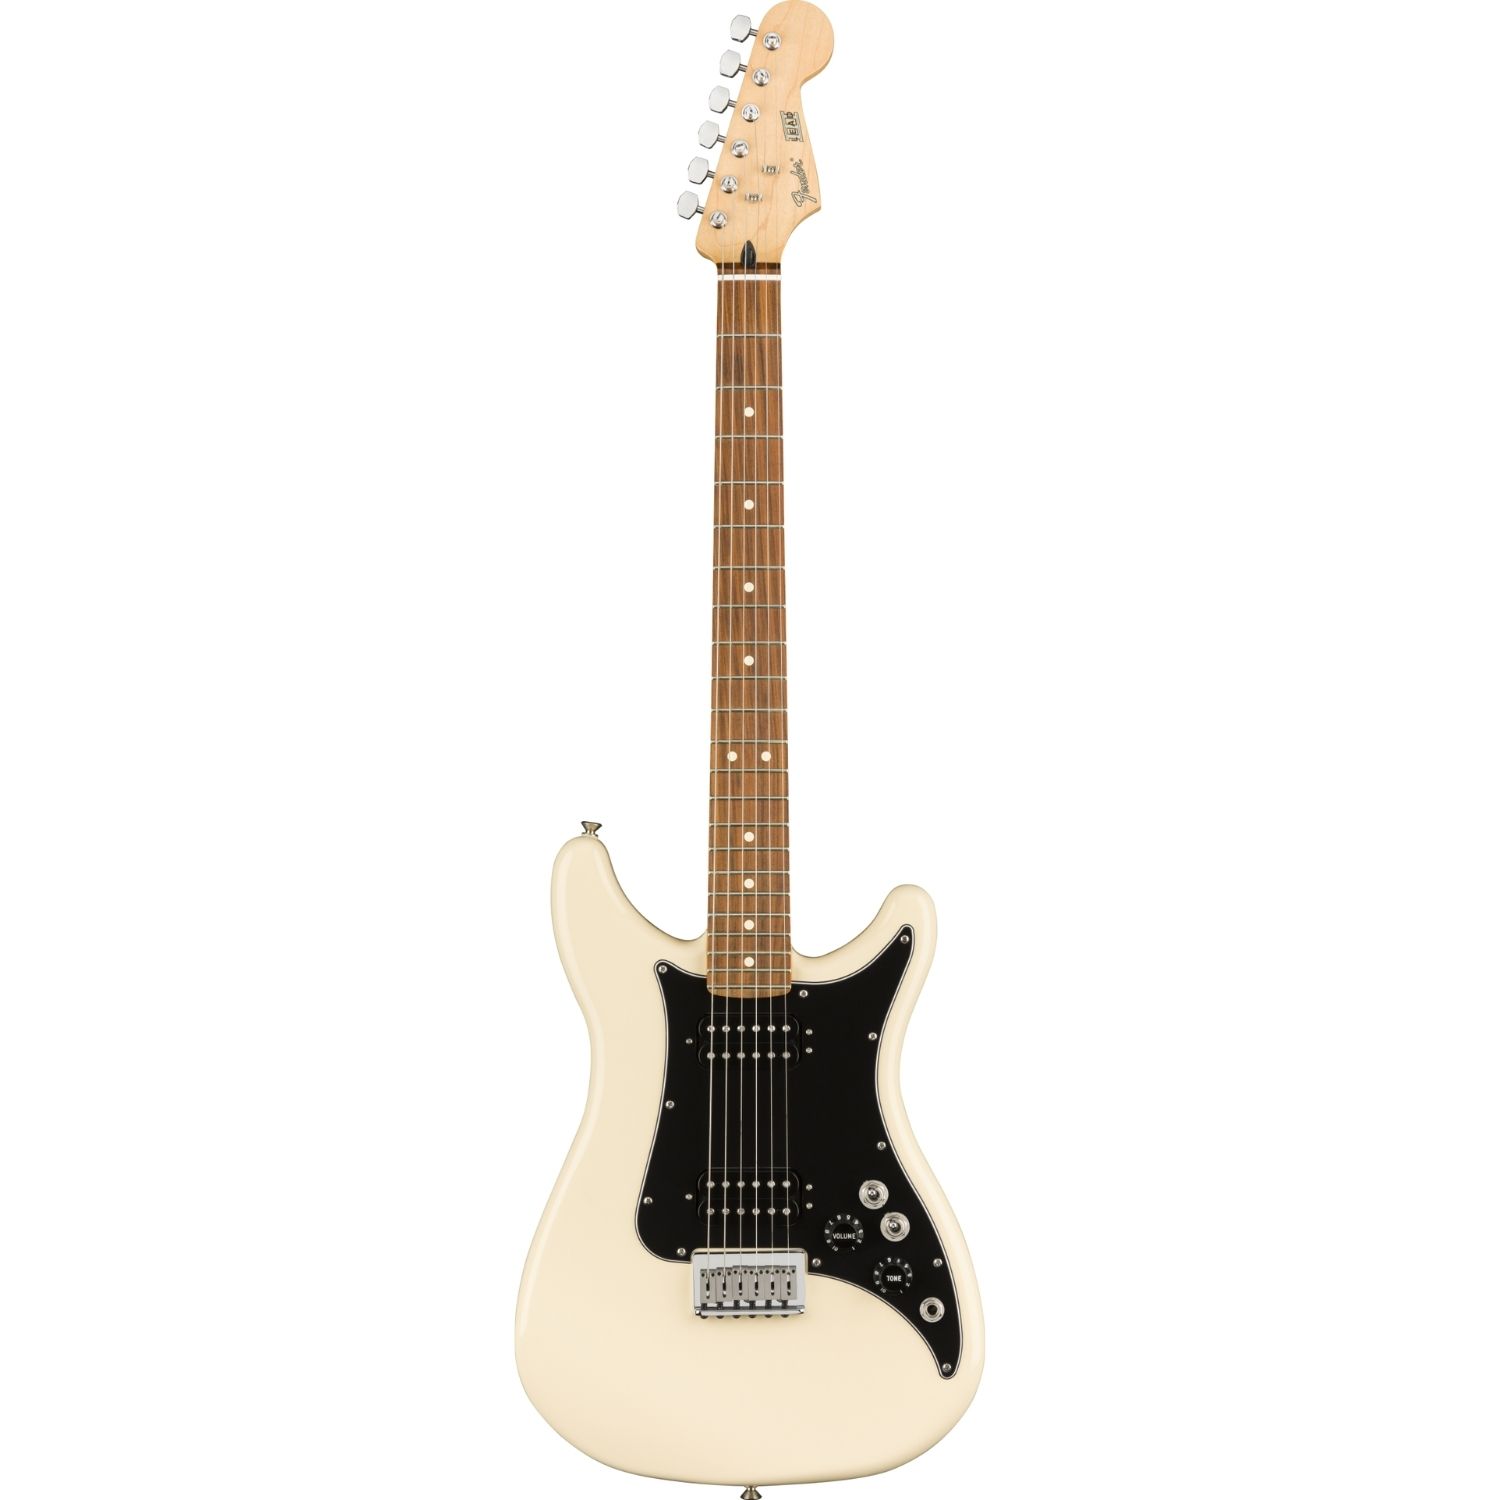 Fender Player Strat, Lead III online price in India